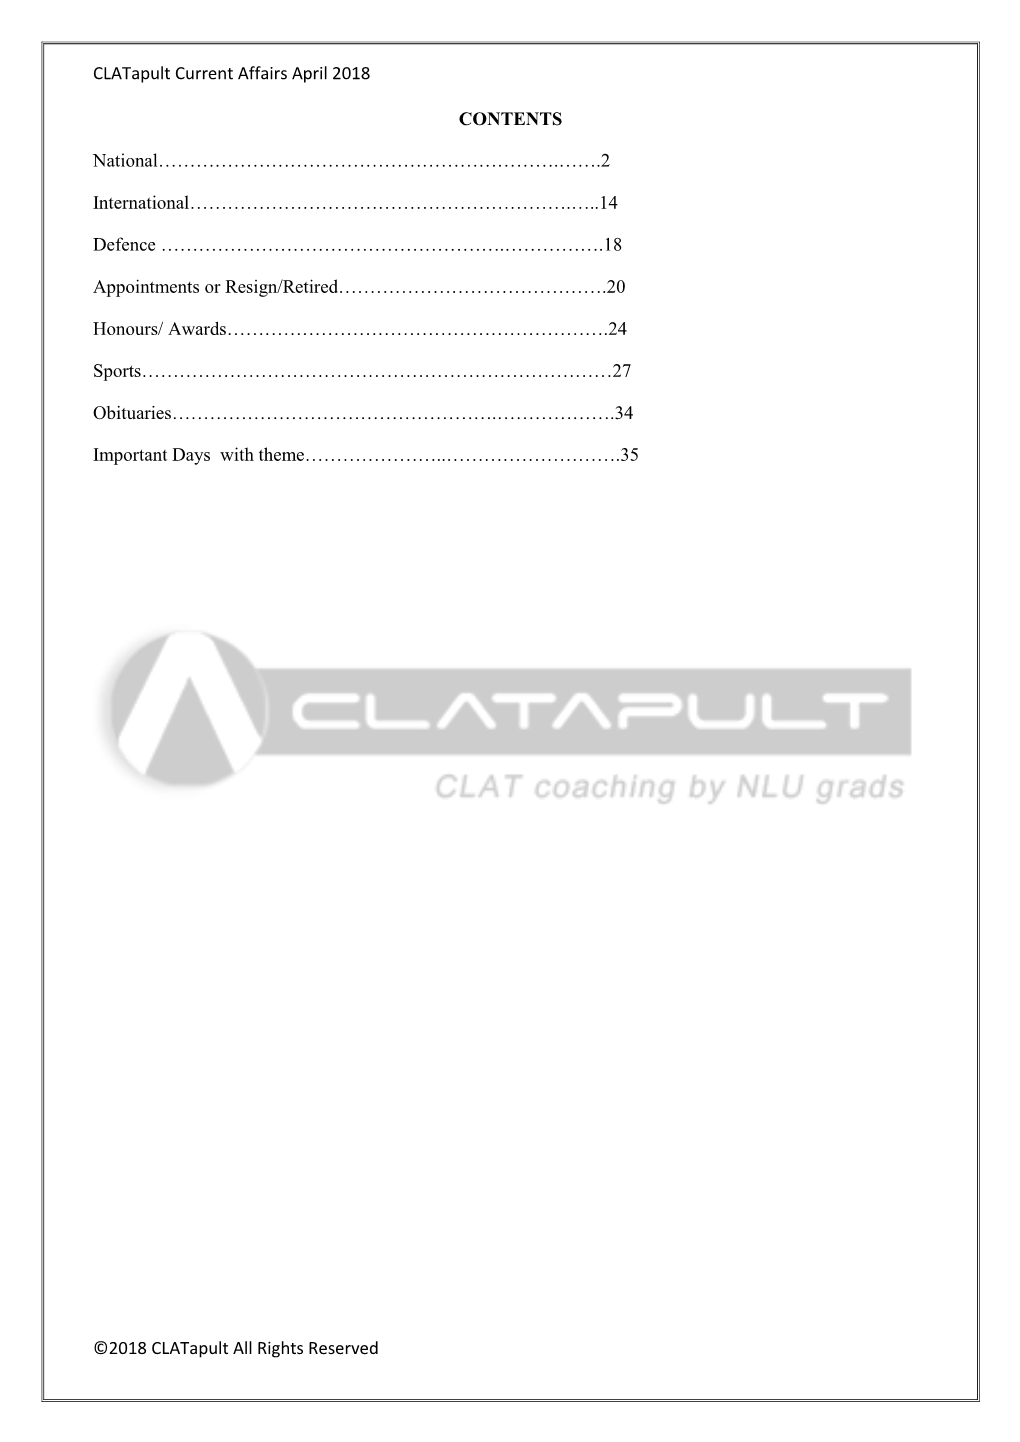 Clatapult Current Affairs April 2018 ©2018 Clatapult All Rights Reserved CONTENTS National………………………………